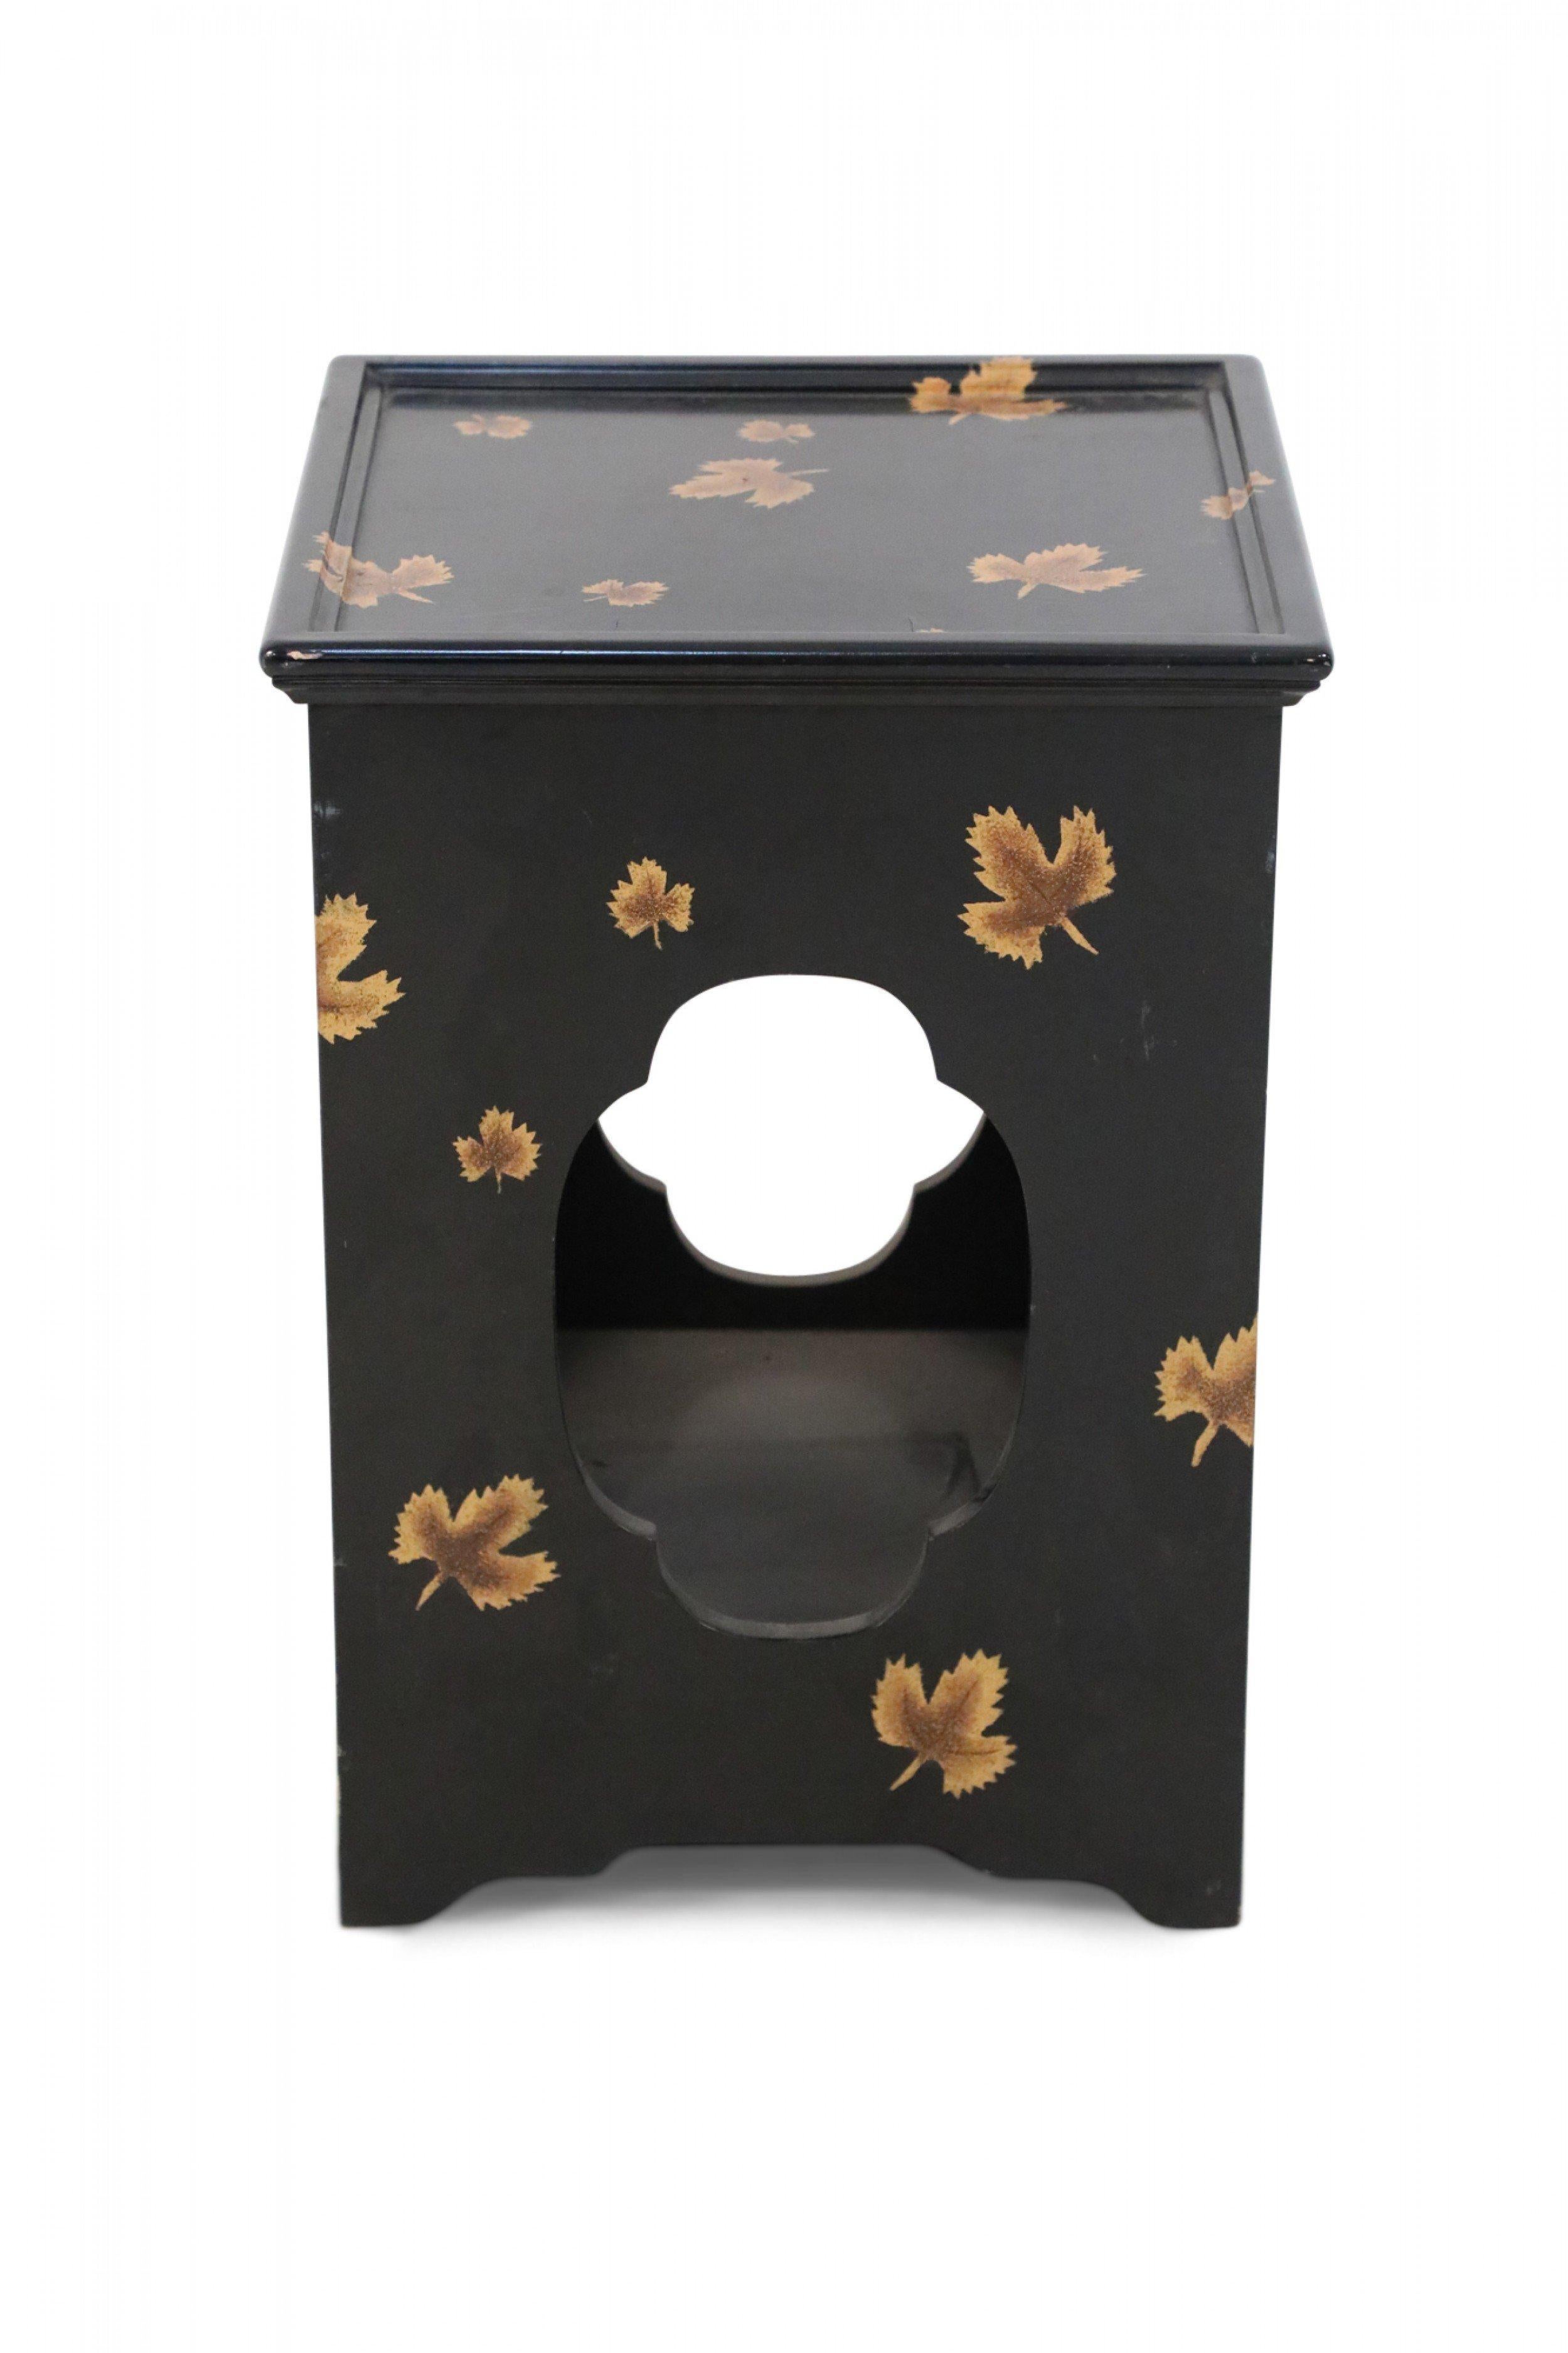 Lacquered Contemporary Chinese Black and Leaf Motif Square Side Tables For Sale